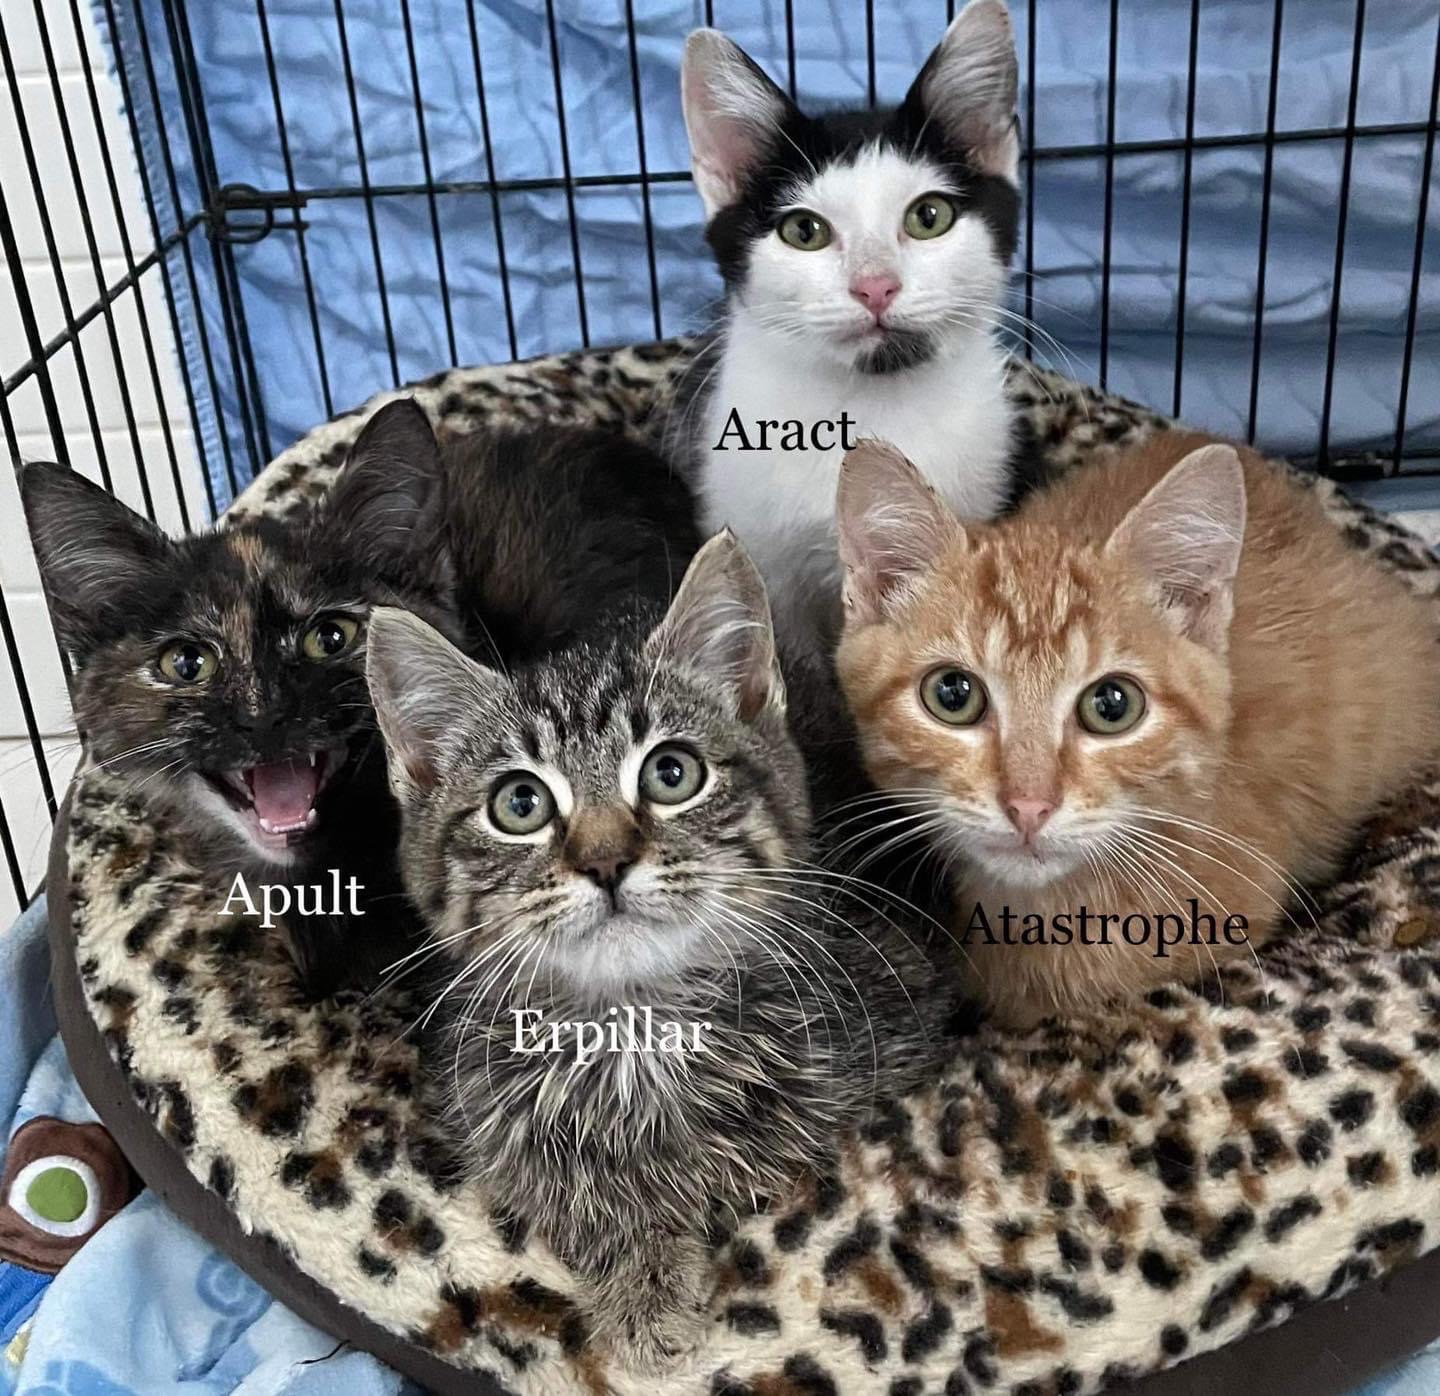 Mission Meow Cat Adoptions  Kitten Adoptions Near Me - Serving